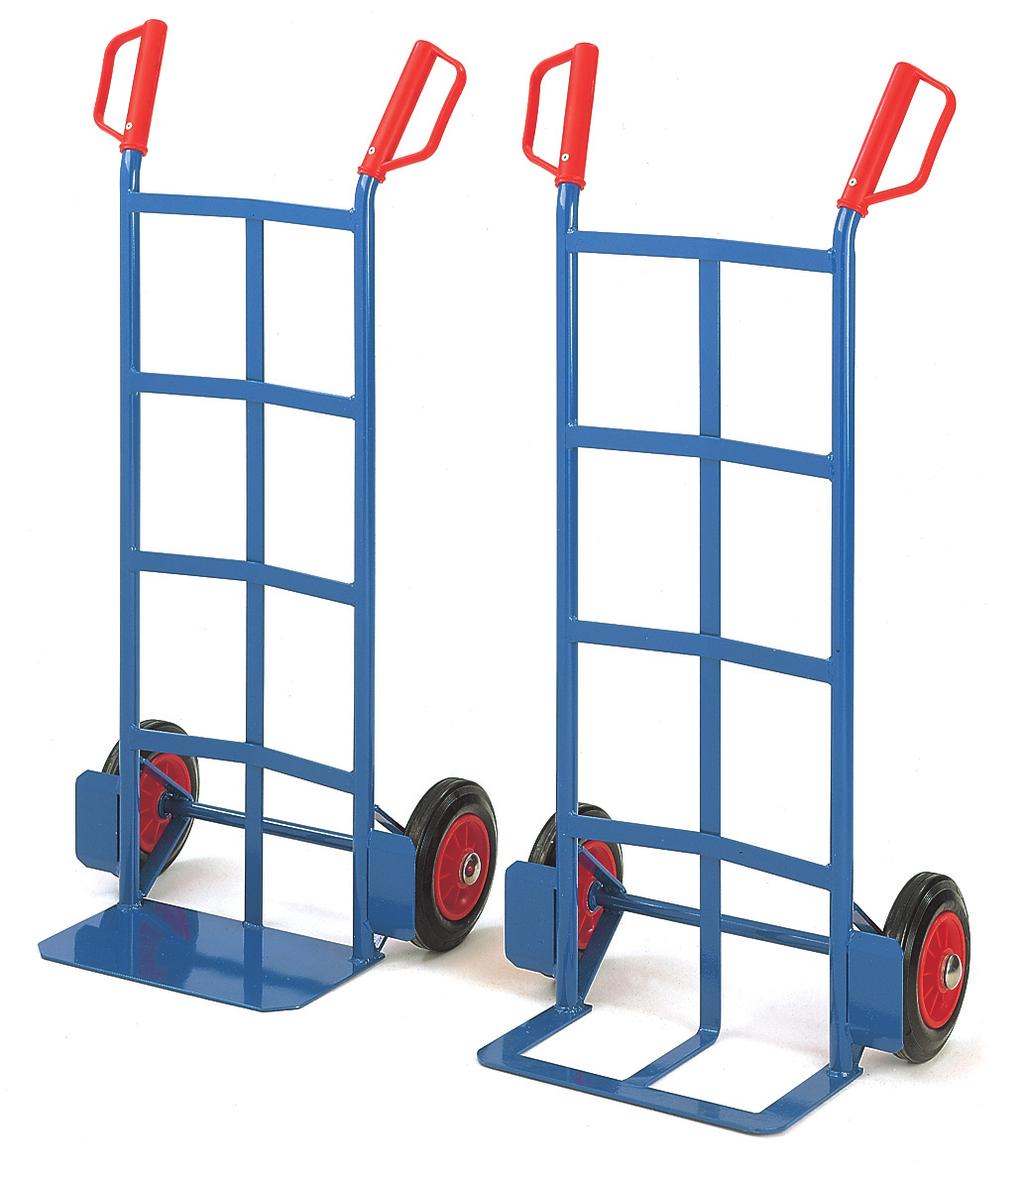 75 Traditional sack trucks ST63 ST35 Traditional, strong, parallel back sack trucks with a multitude of uses High load capacity trucks.